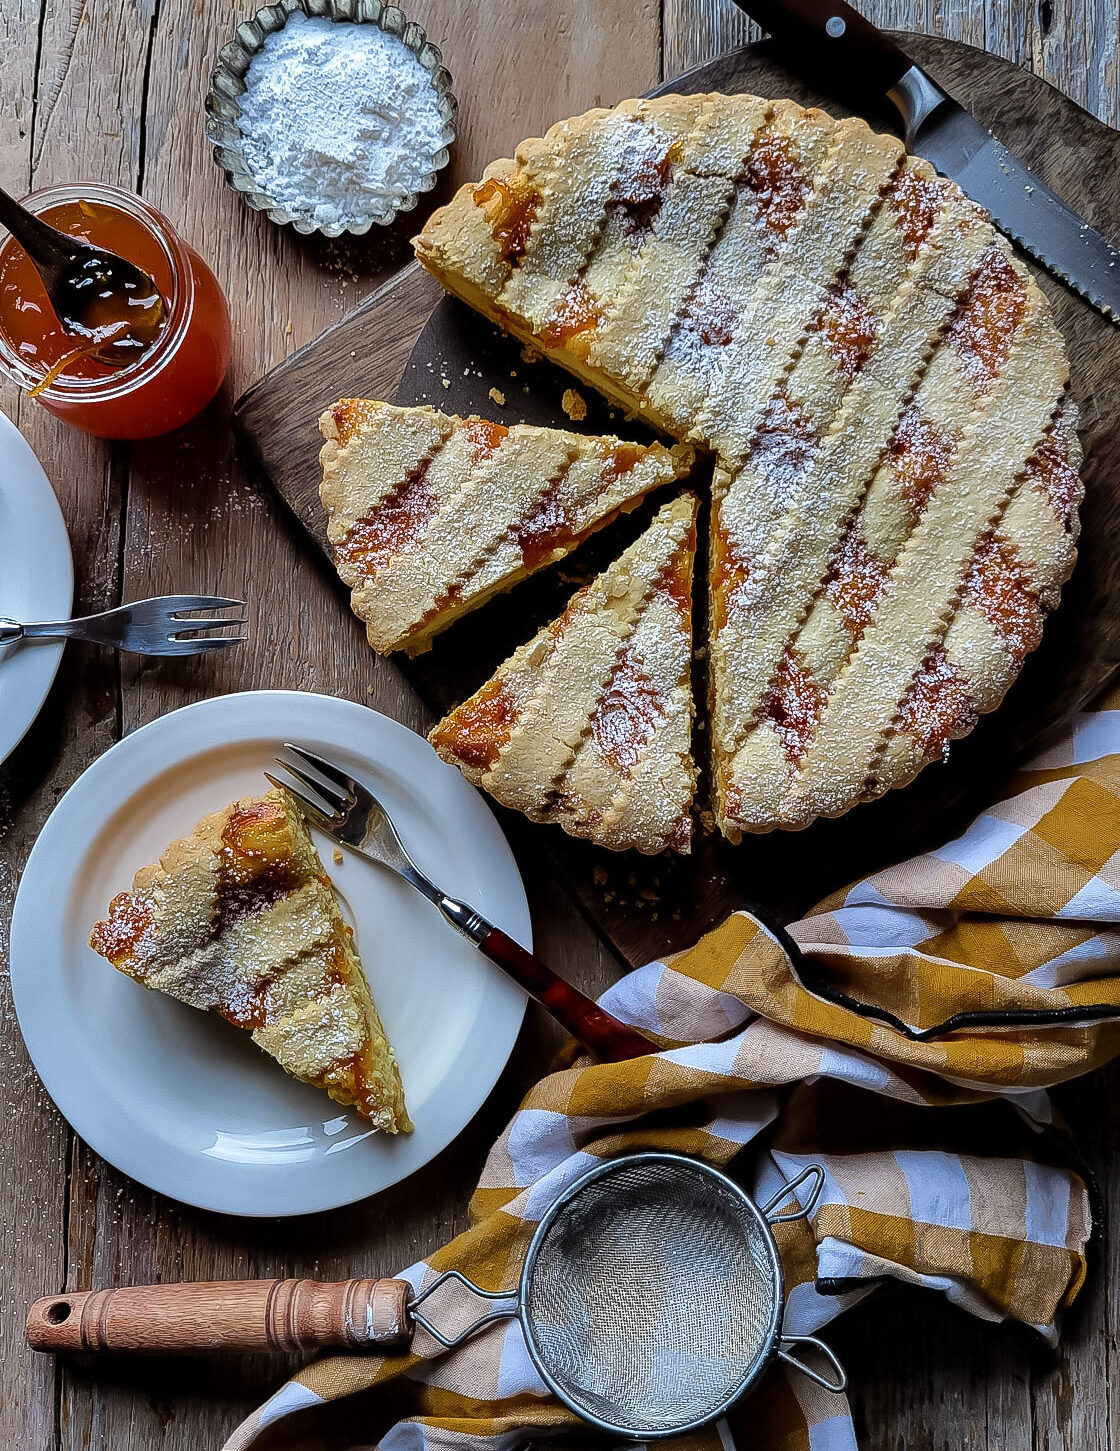 A tablescape of baked Marmalade Ricotta Crostata on a cutting board, with a knife, a jar of marmalade and tea towel surrounding it. A plate with a slice, as well as icing sugar and a mesh strainer are on the side.